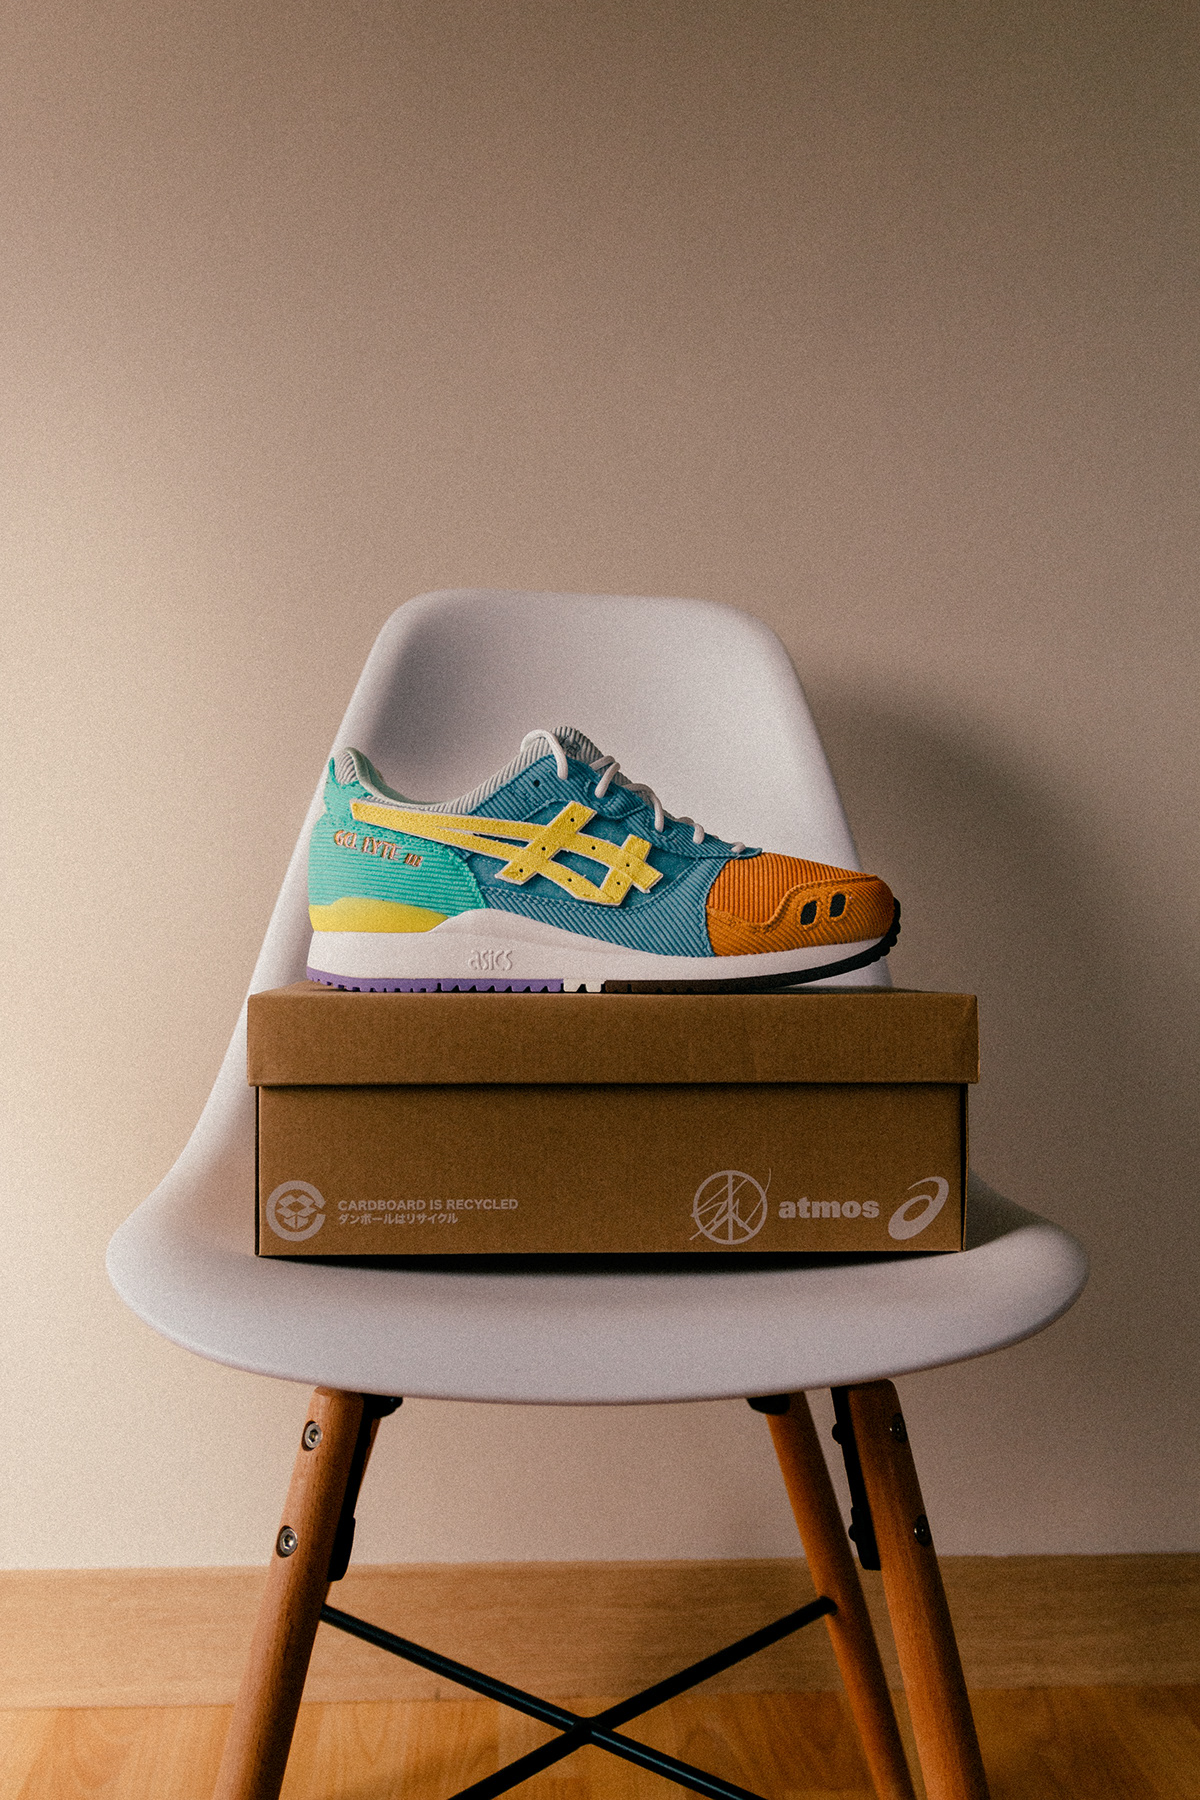 ASICS Gel-Lyte III Sean Wotherspoon x Atmos on Behance